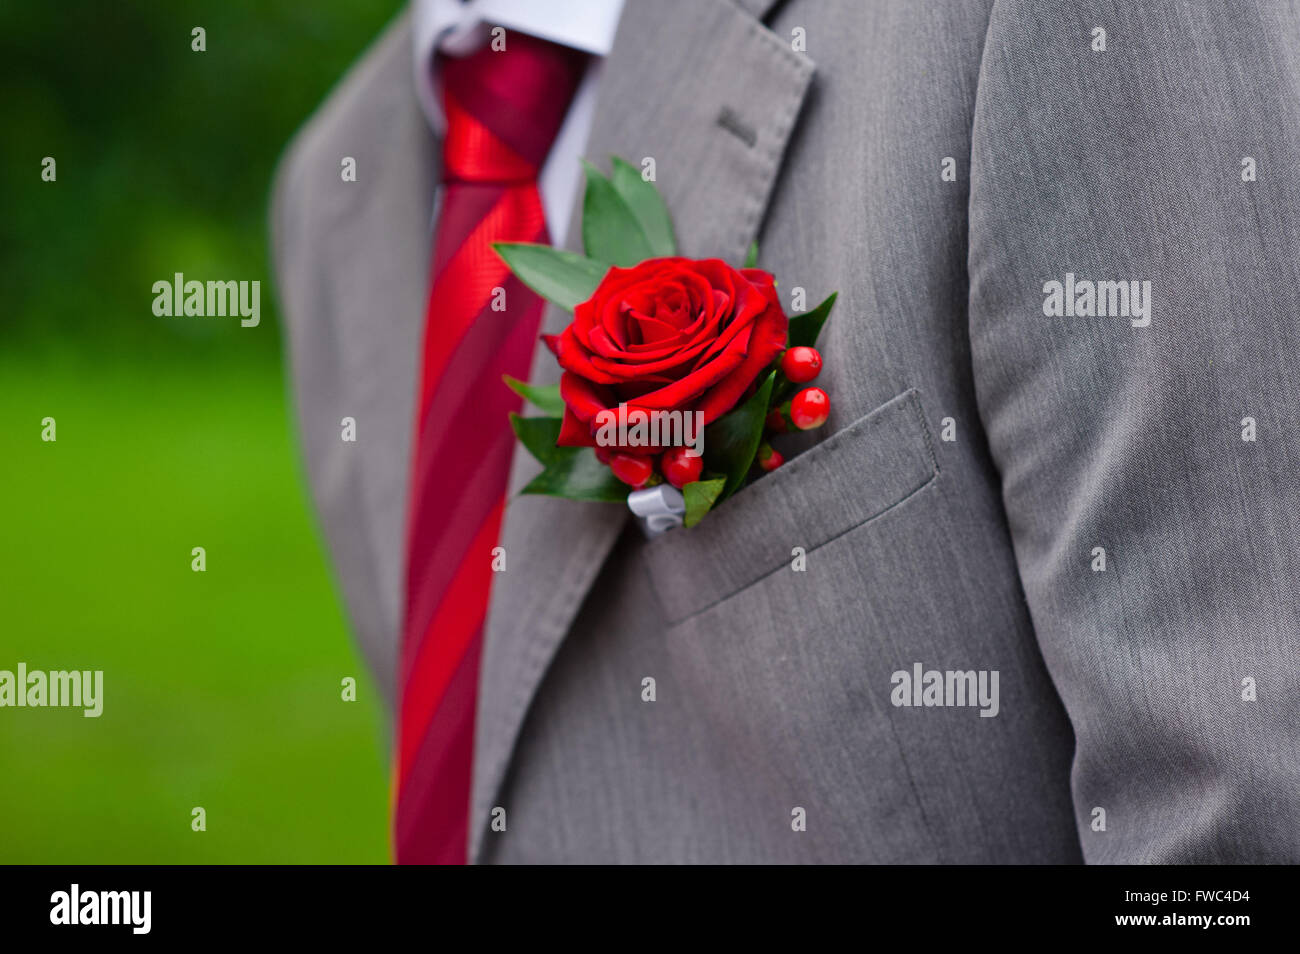 Red Rose boutonniere on grey suit Stock Photo